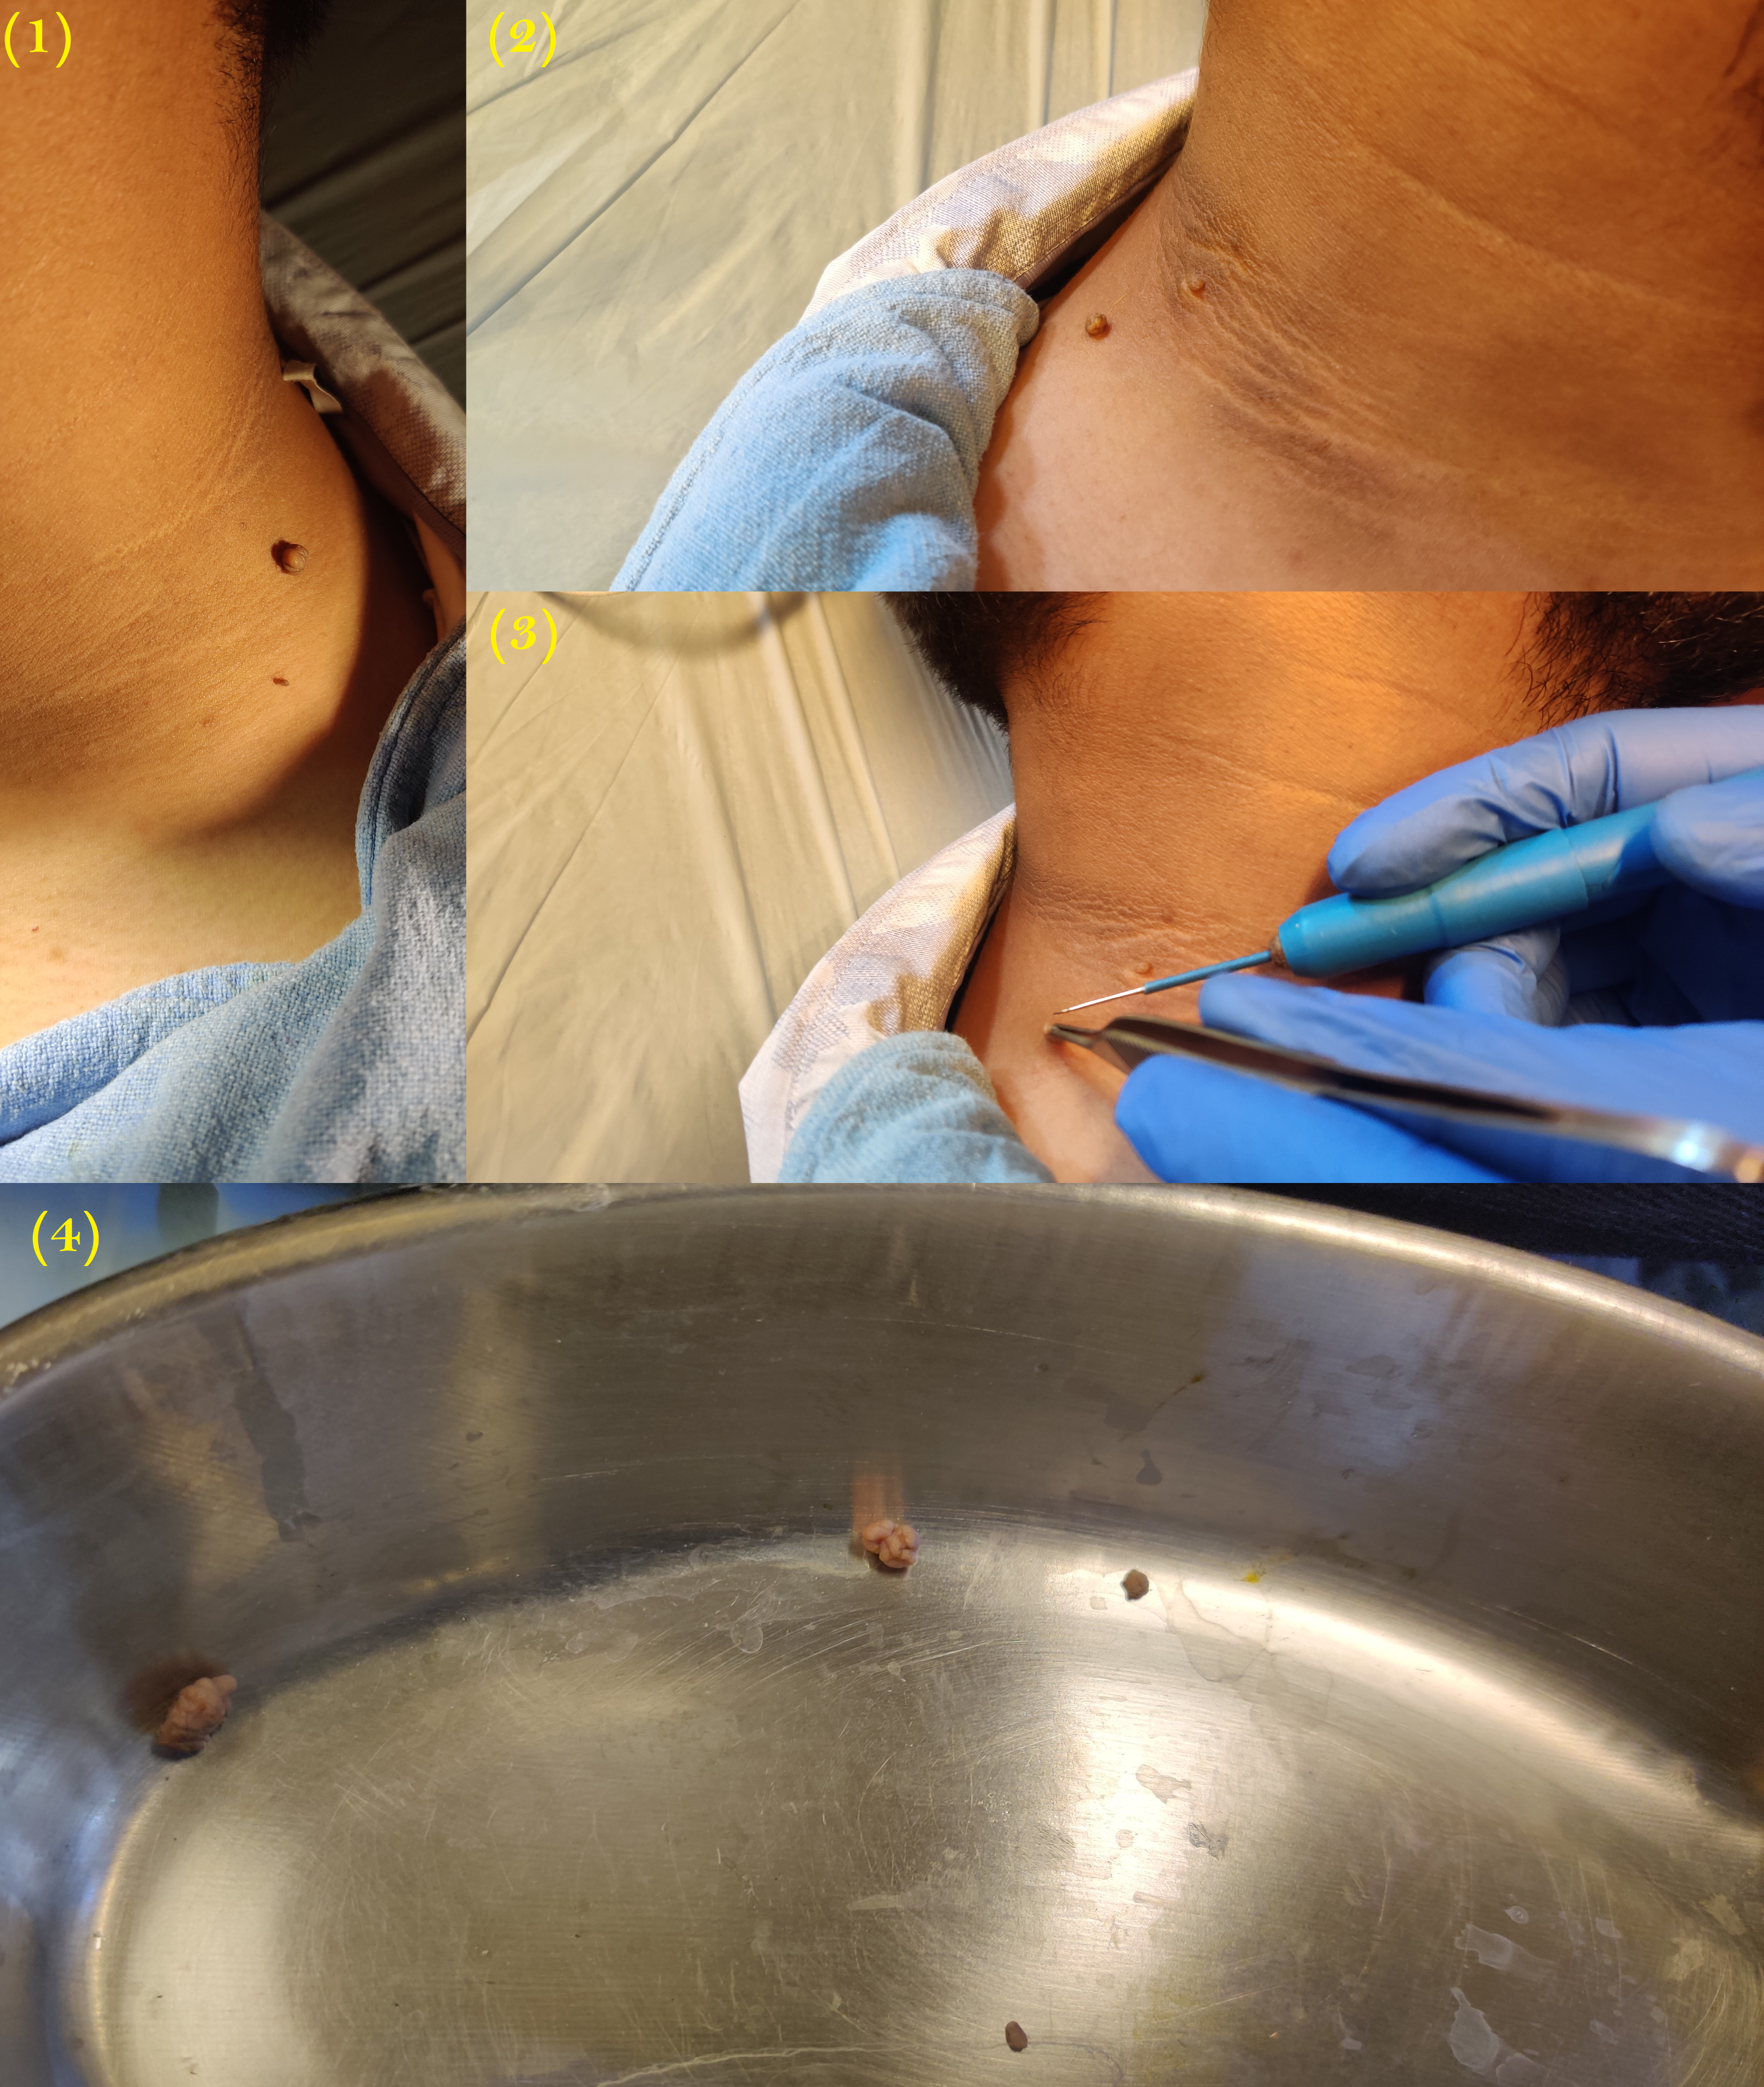 Images of skin tags and their removal using the radio cautery in the area surrounding the neck region